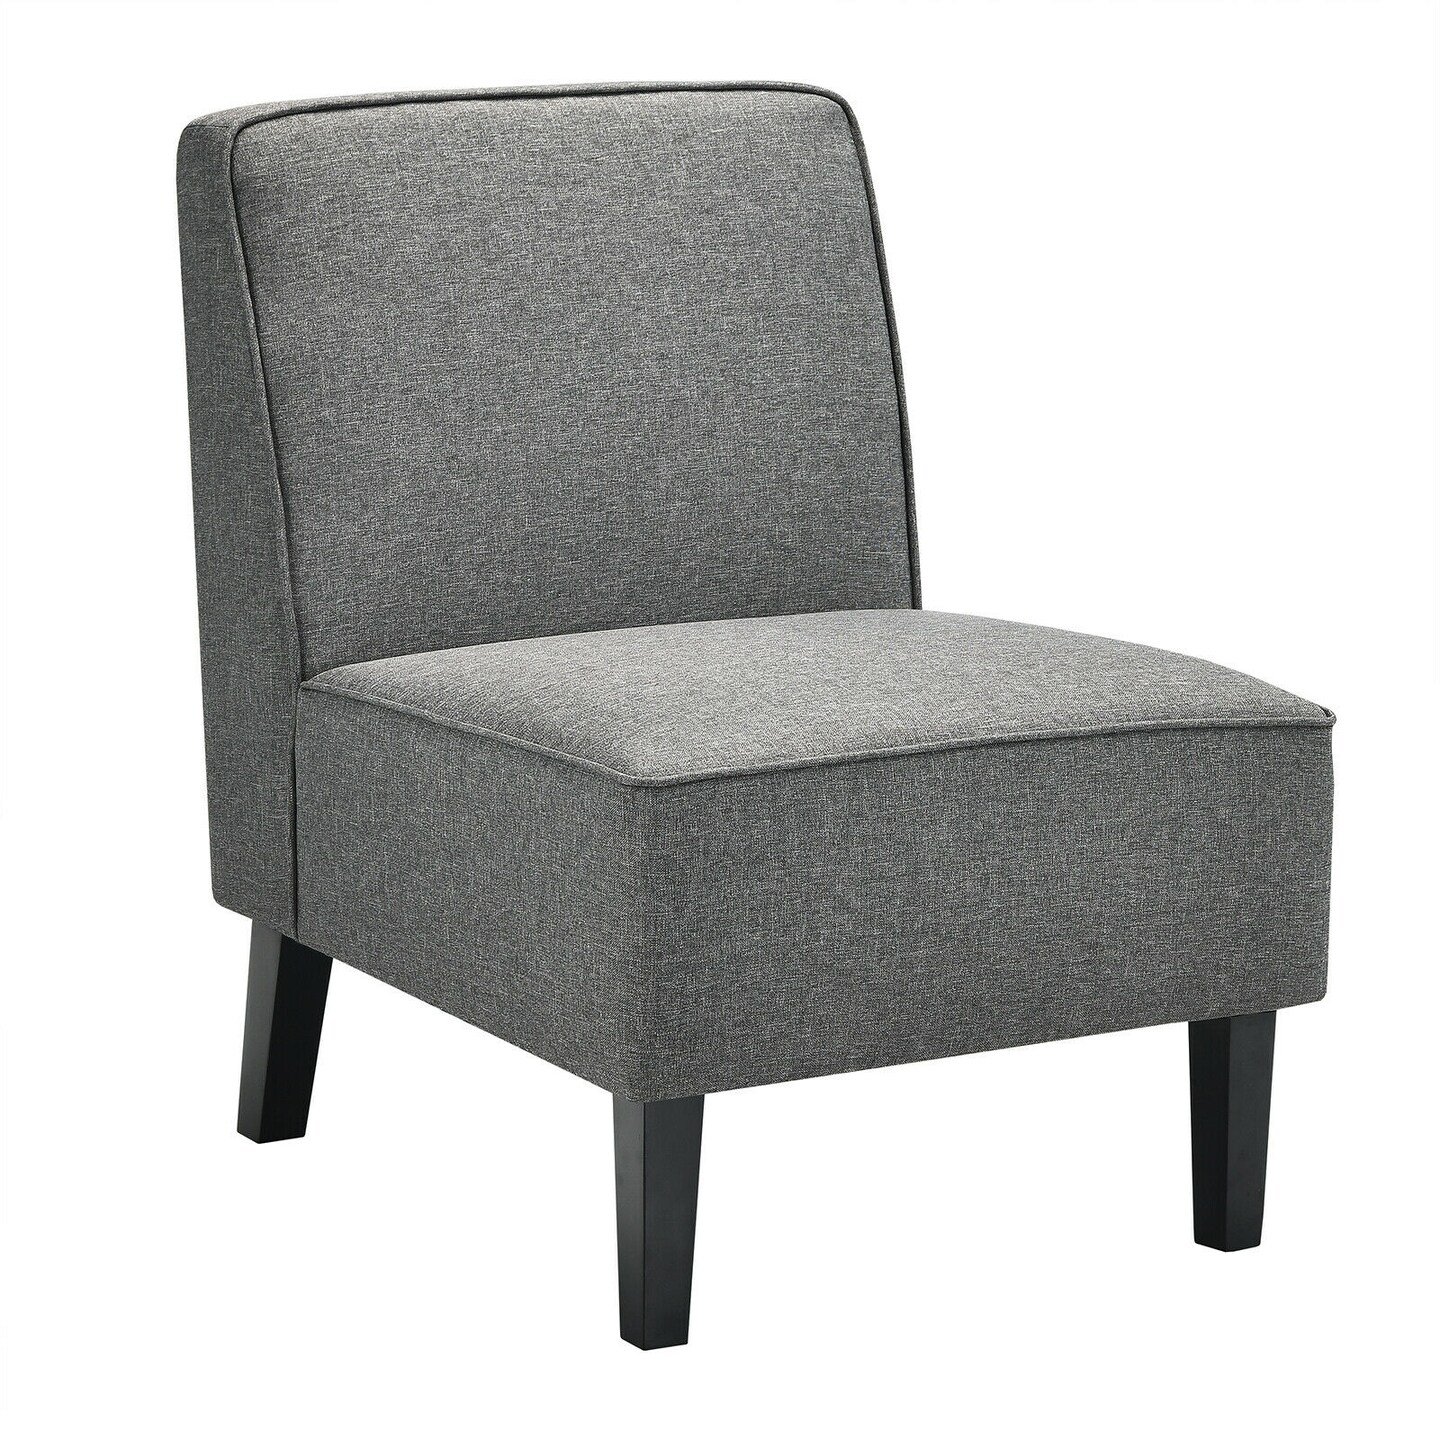 GZMR Gray Upholstered Office Chair Armless with Wood Legs